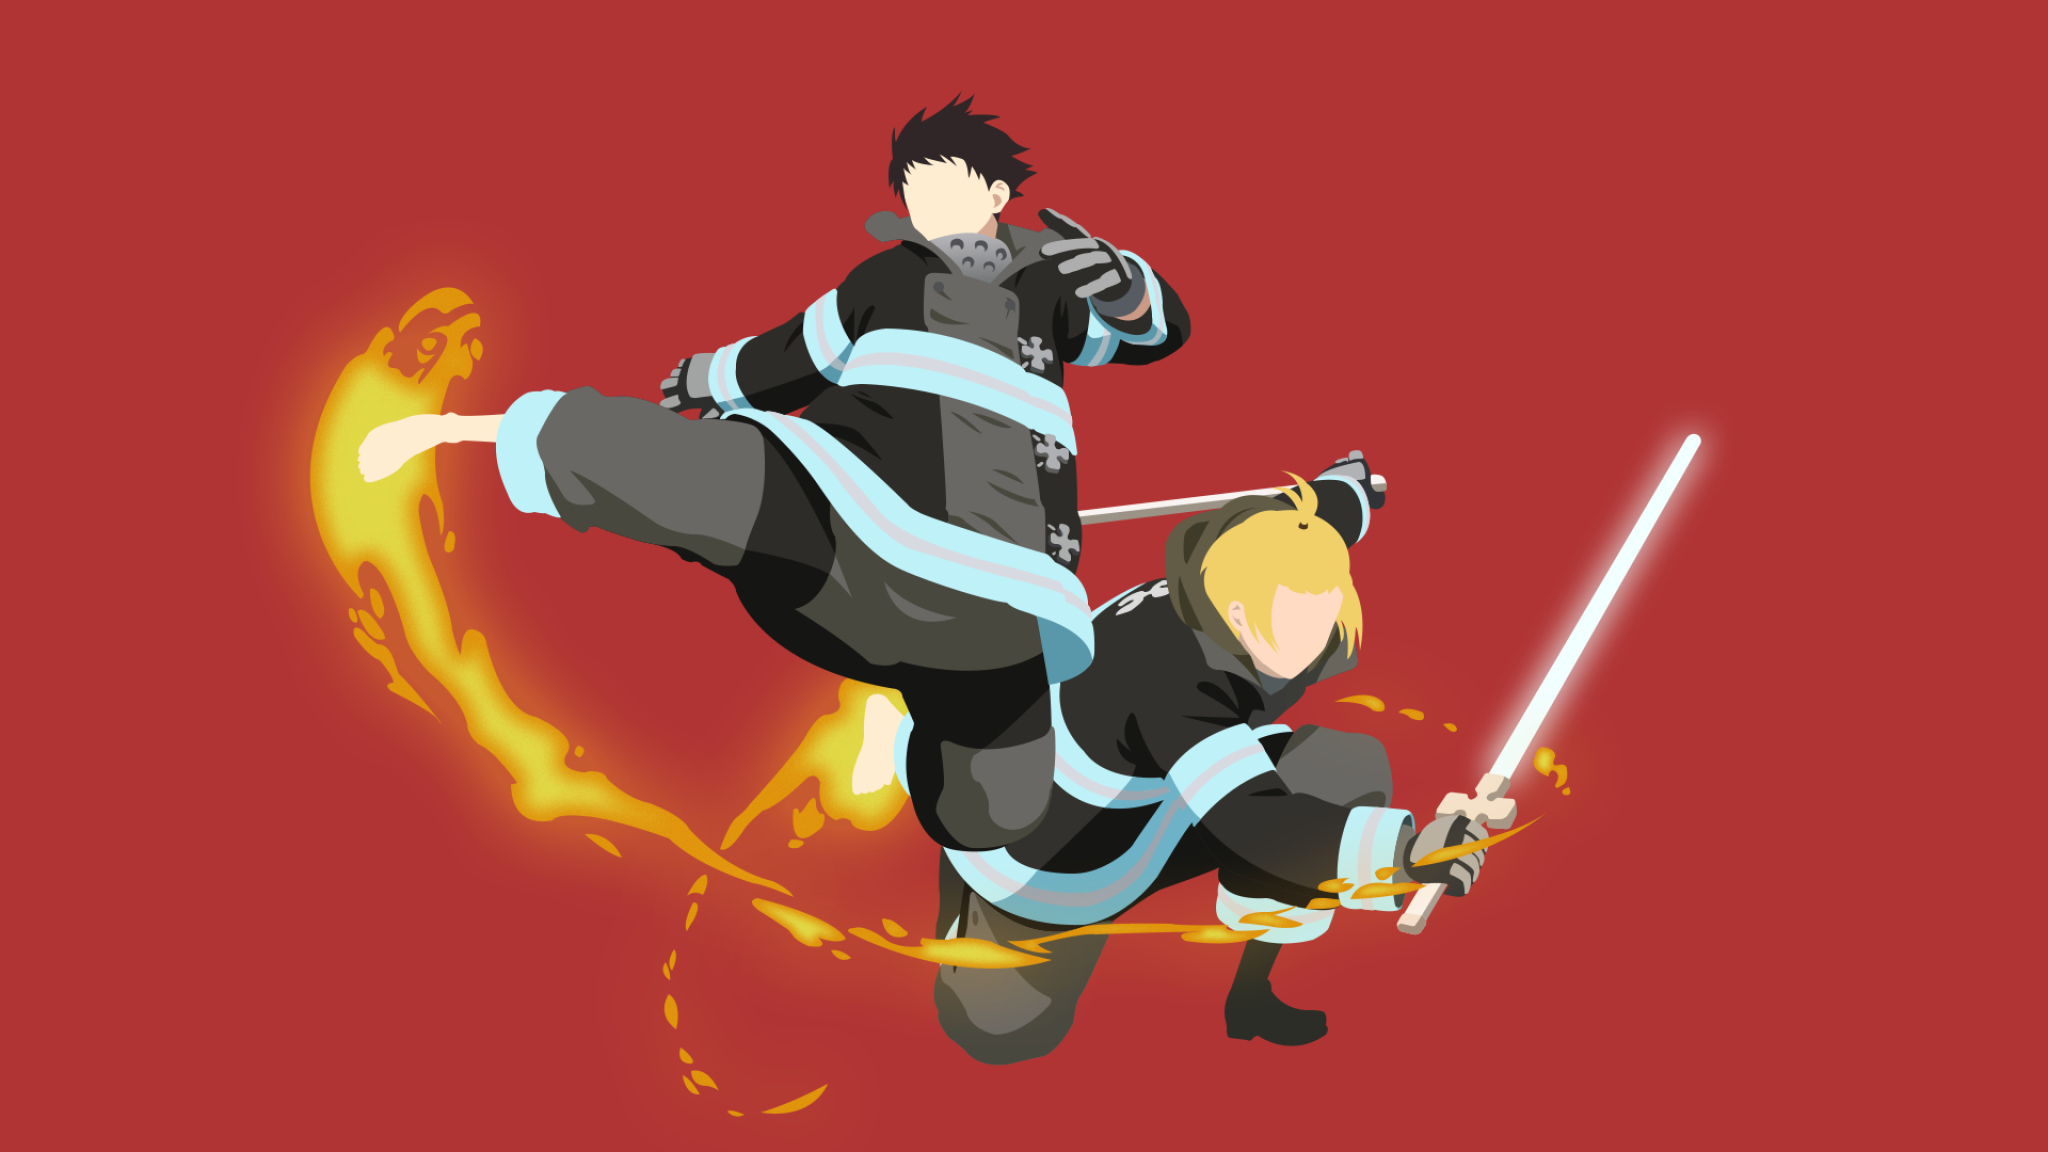 48x1152 Fire Force Anime 48x1152 Resolution Wallpaper Hd Minimalist 4k Wallpapers Images Photos And Background